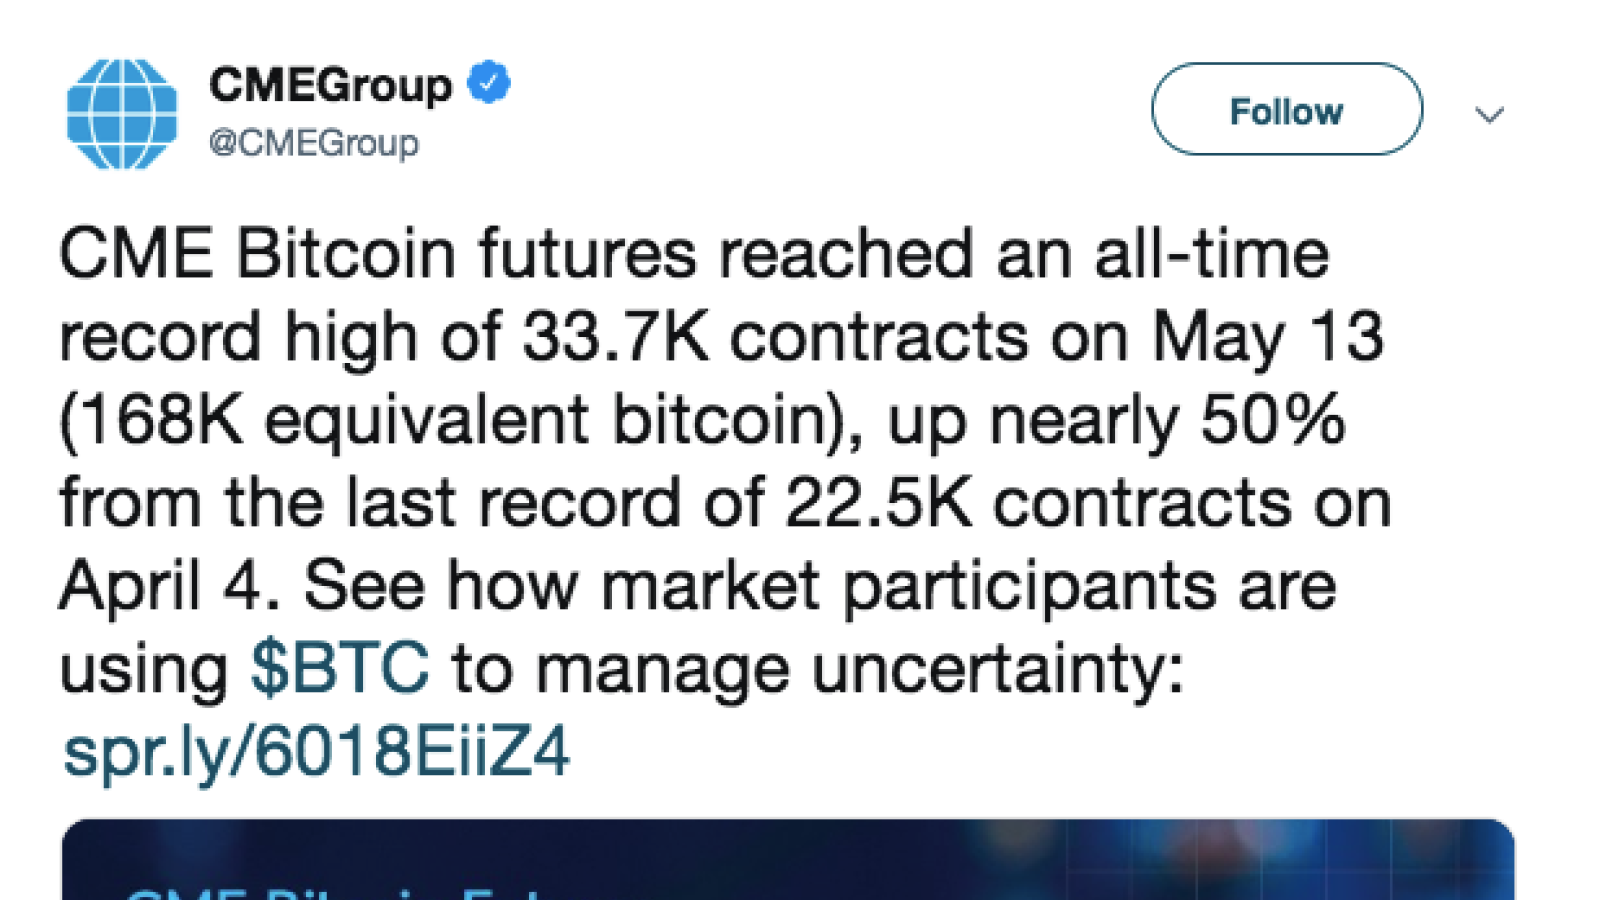 Bitcoin futures statistics by CME Group